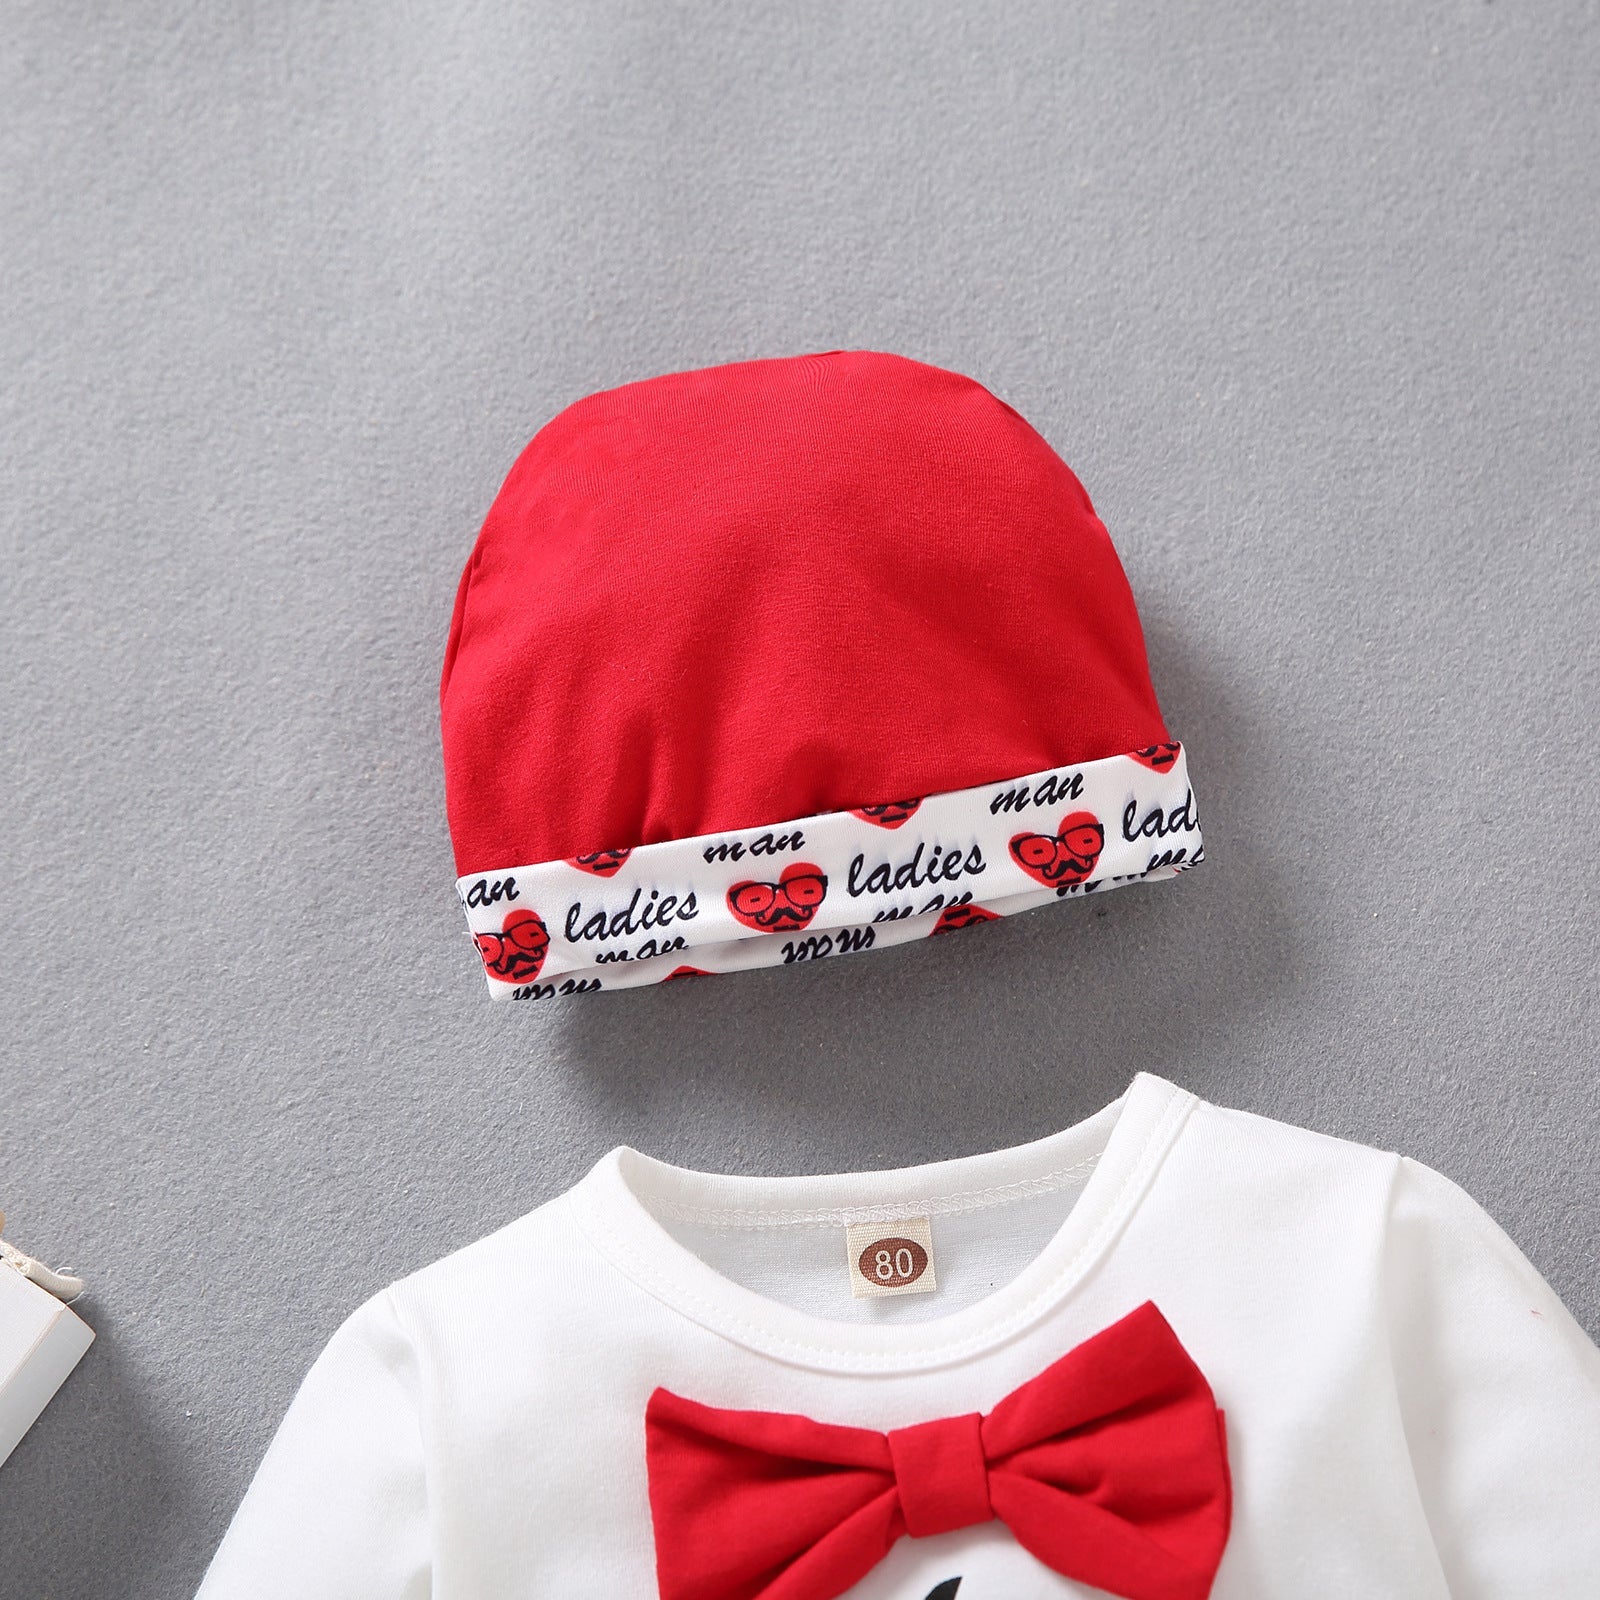 Baby Girl Valentine's Day Hot Seller Bowknot Heart-printed 3 Pcs Sets